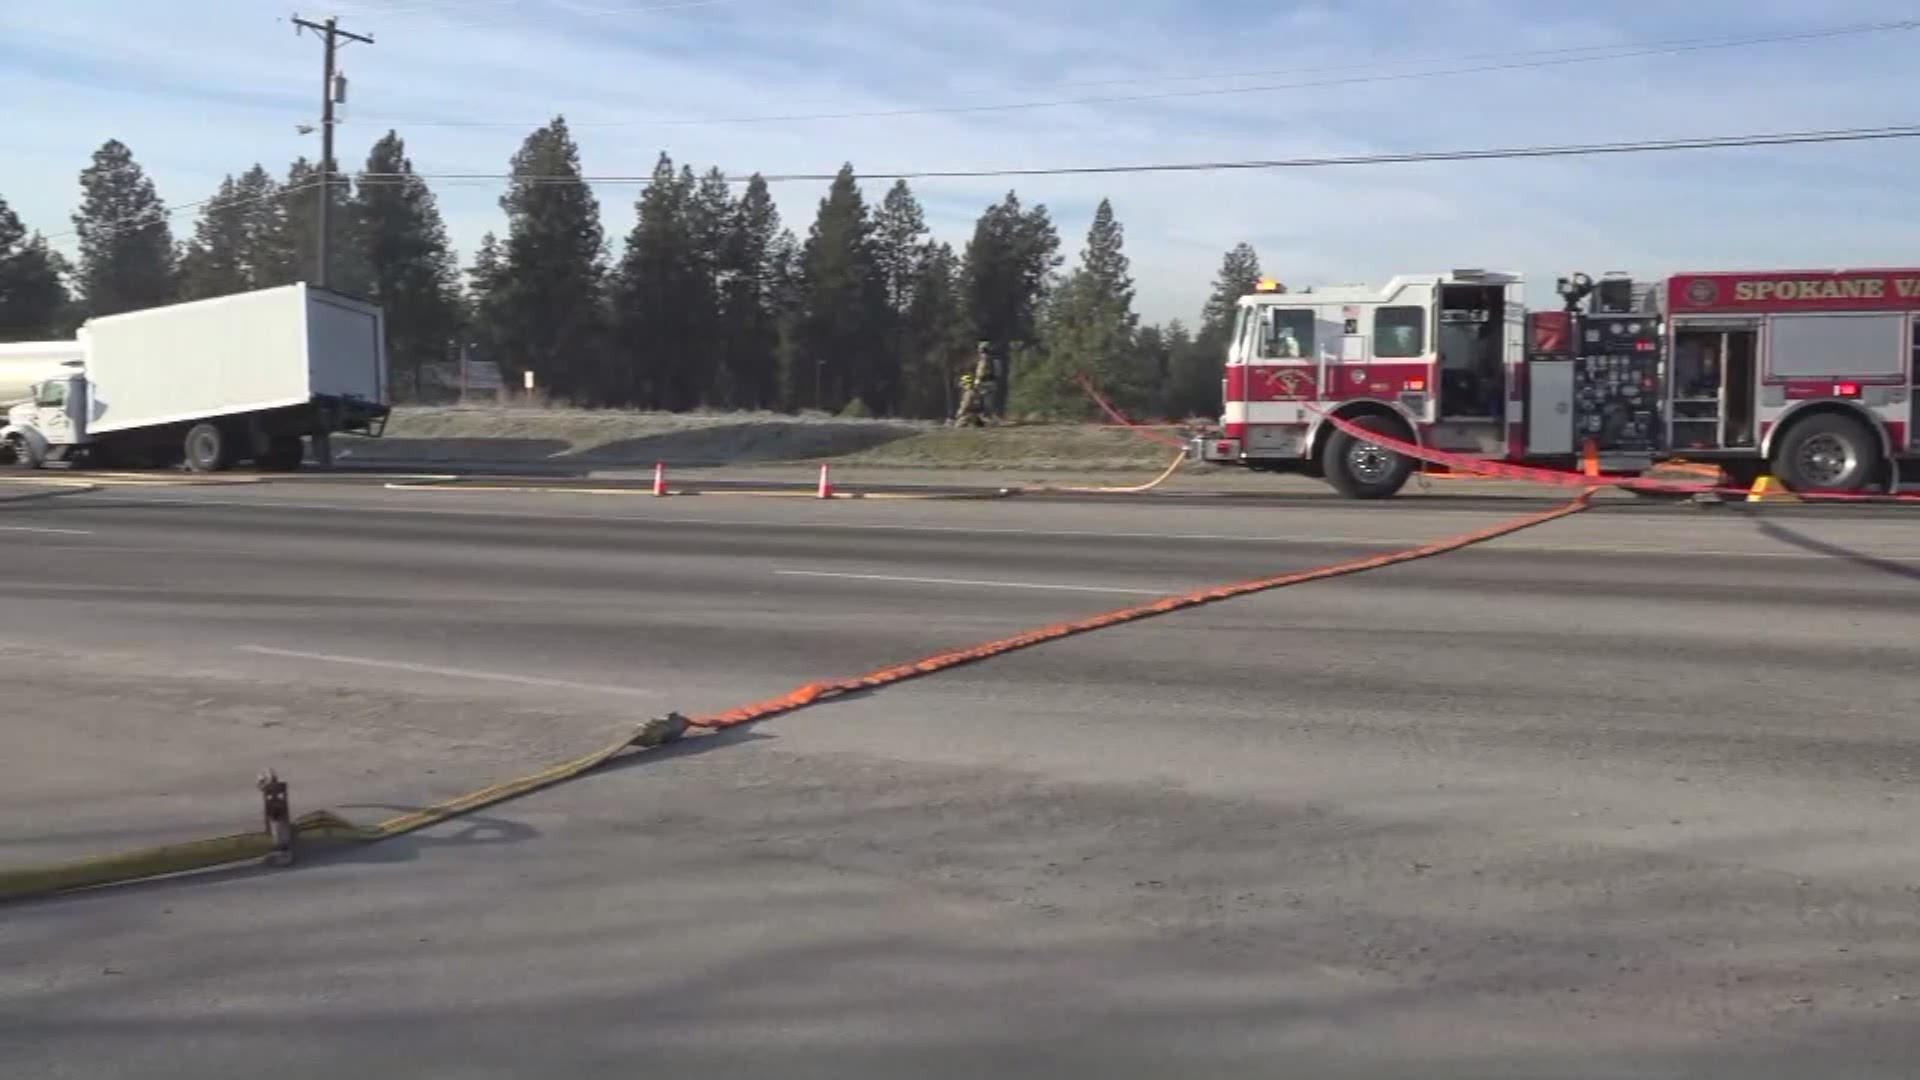 According to a Spokane Valley Fire Department spokesperson, a refrigerator truck ran into an fuel tanker carrying 3,000 gallons of premium unleaded gasoline.